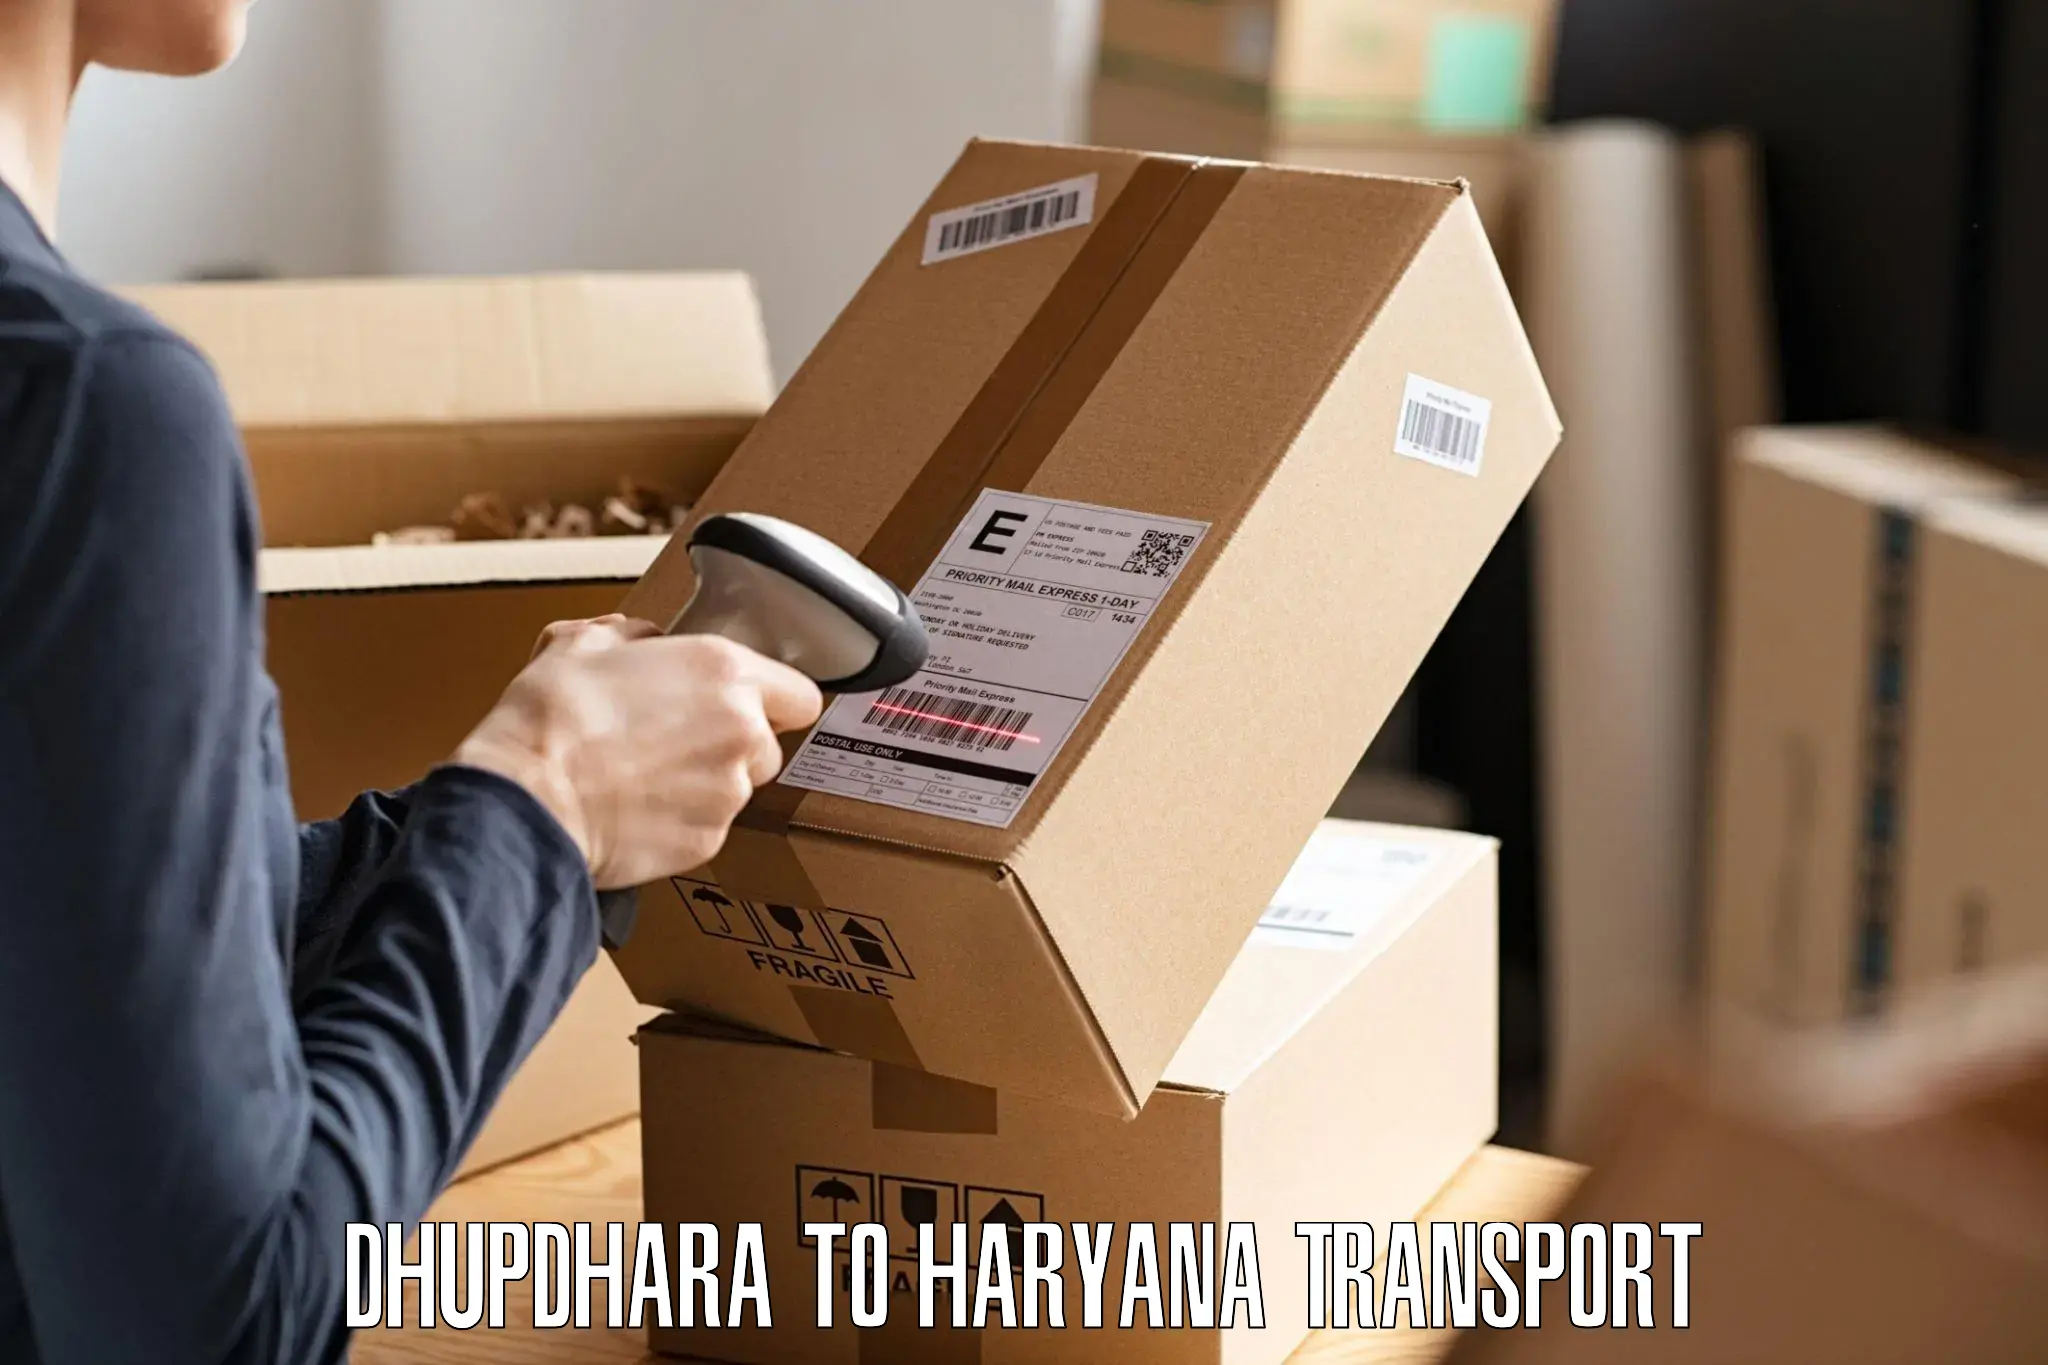 Daily transport service in Dhupdhara to Faridabad